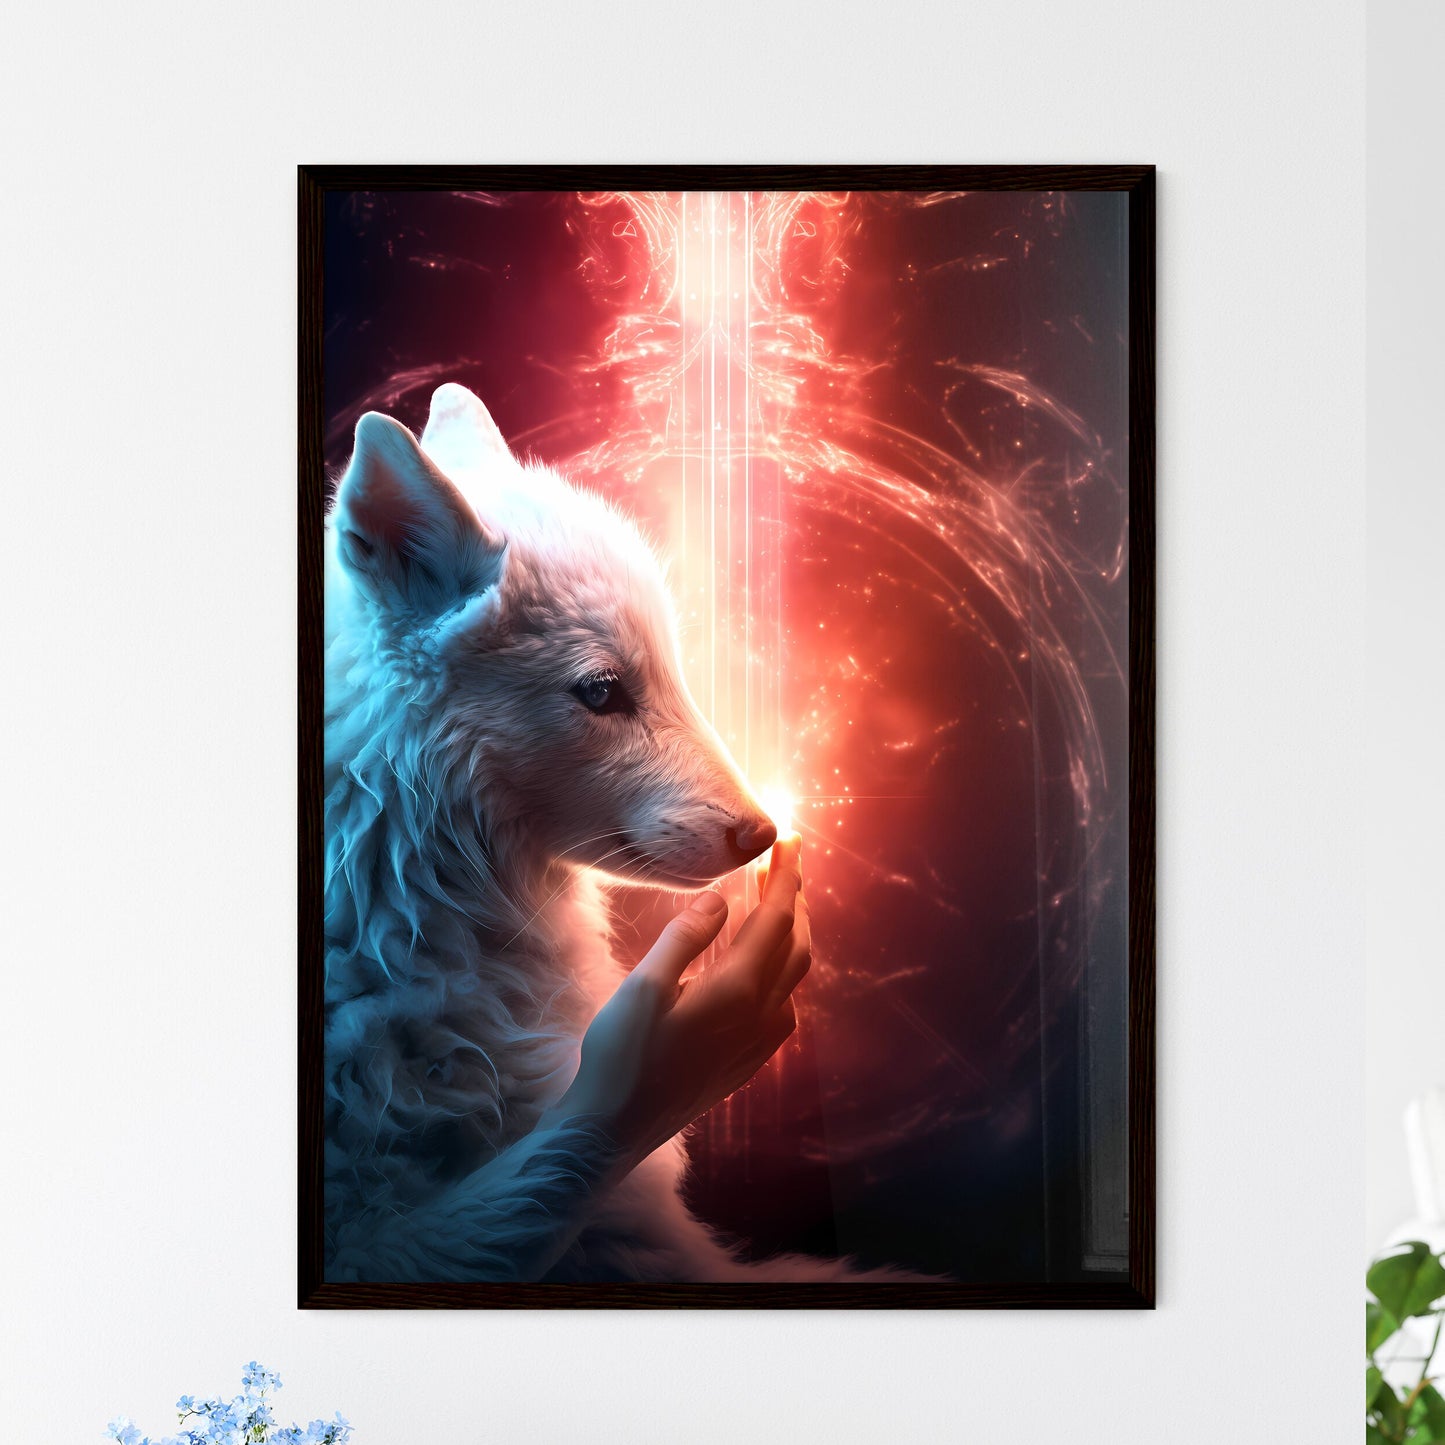 A Poster of A wolf is petting a lamb gently - A White Wolf With A Light Shining On Its Face Default Title